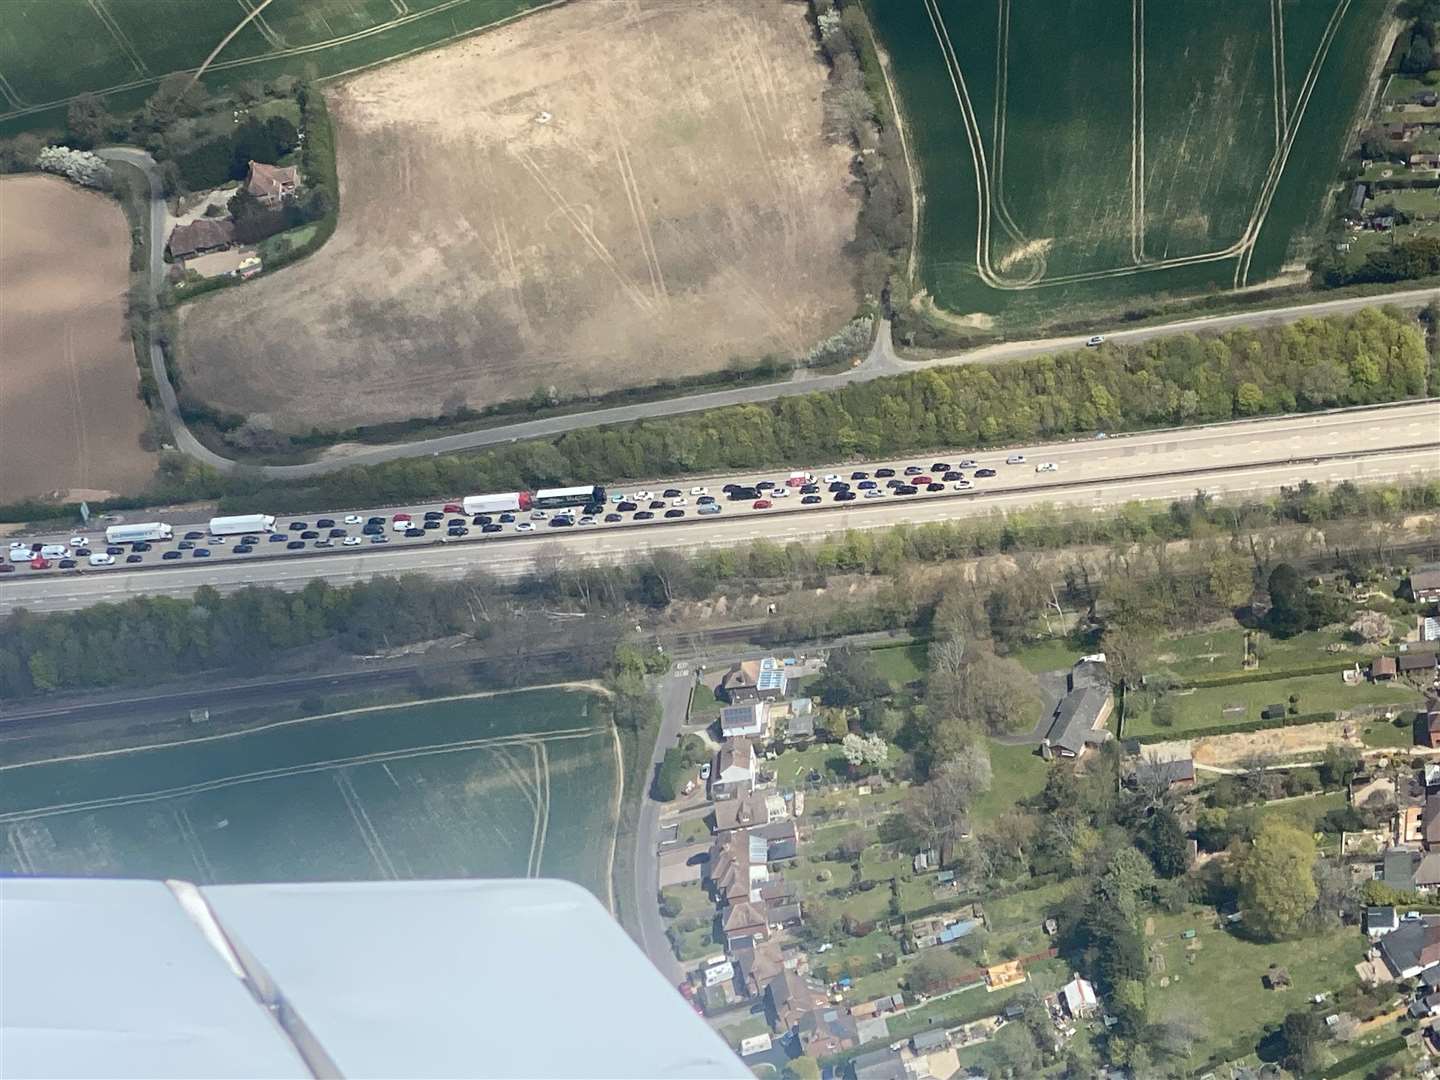 Queues stretched back on the M20 as the Army surveyed the scene. Picture: Keith McCarthy